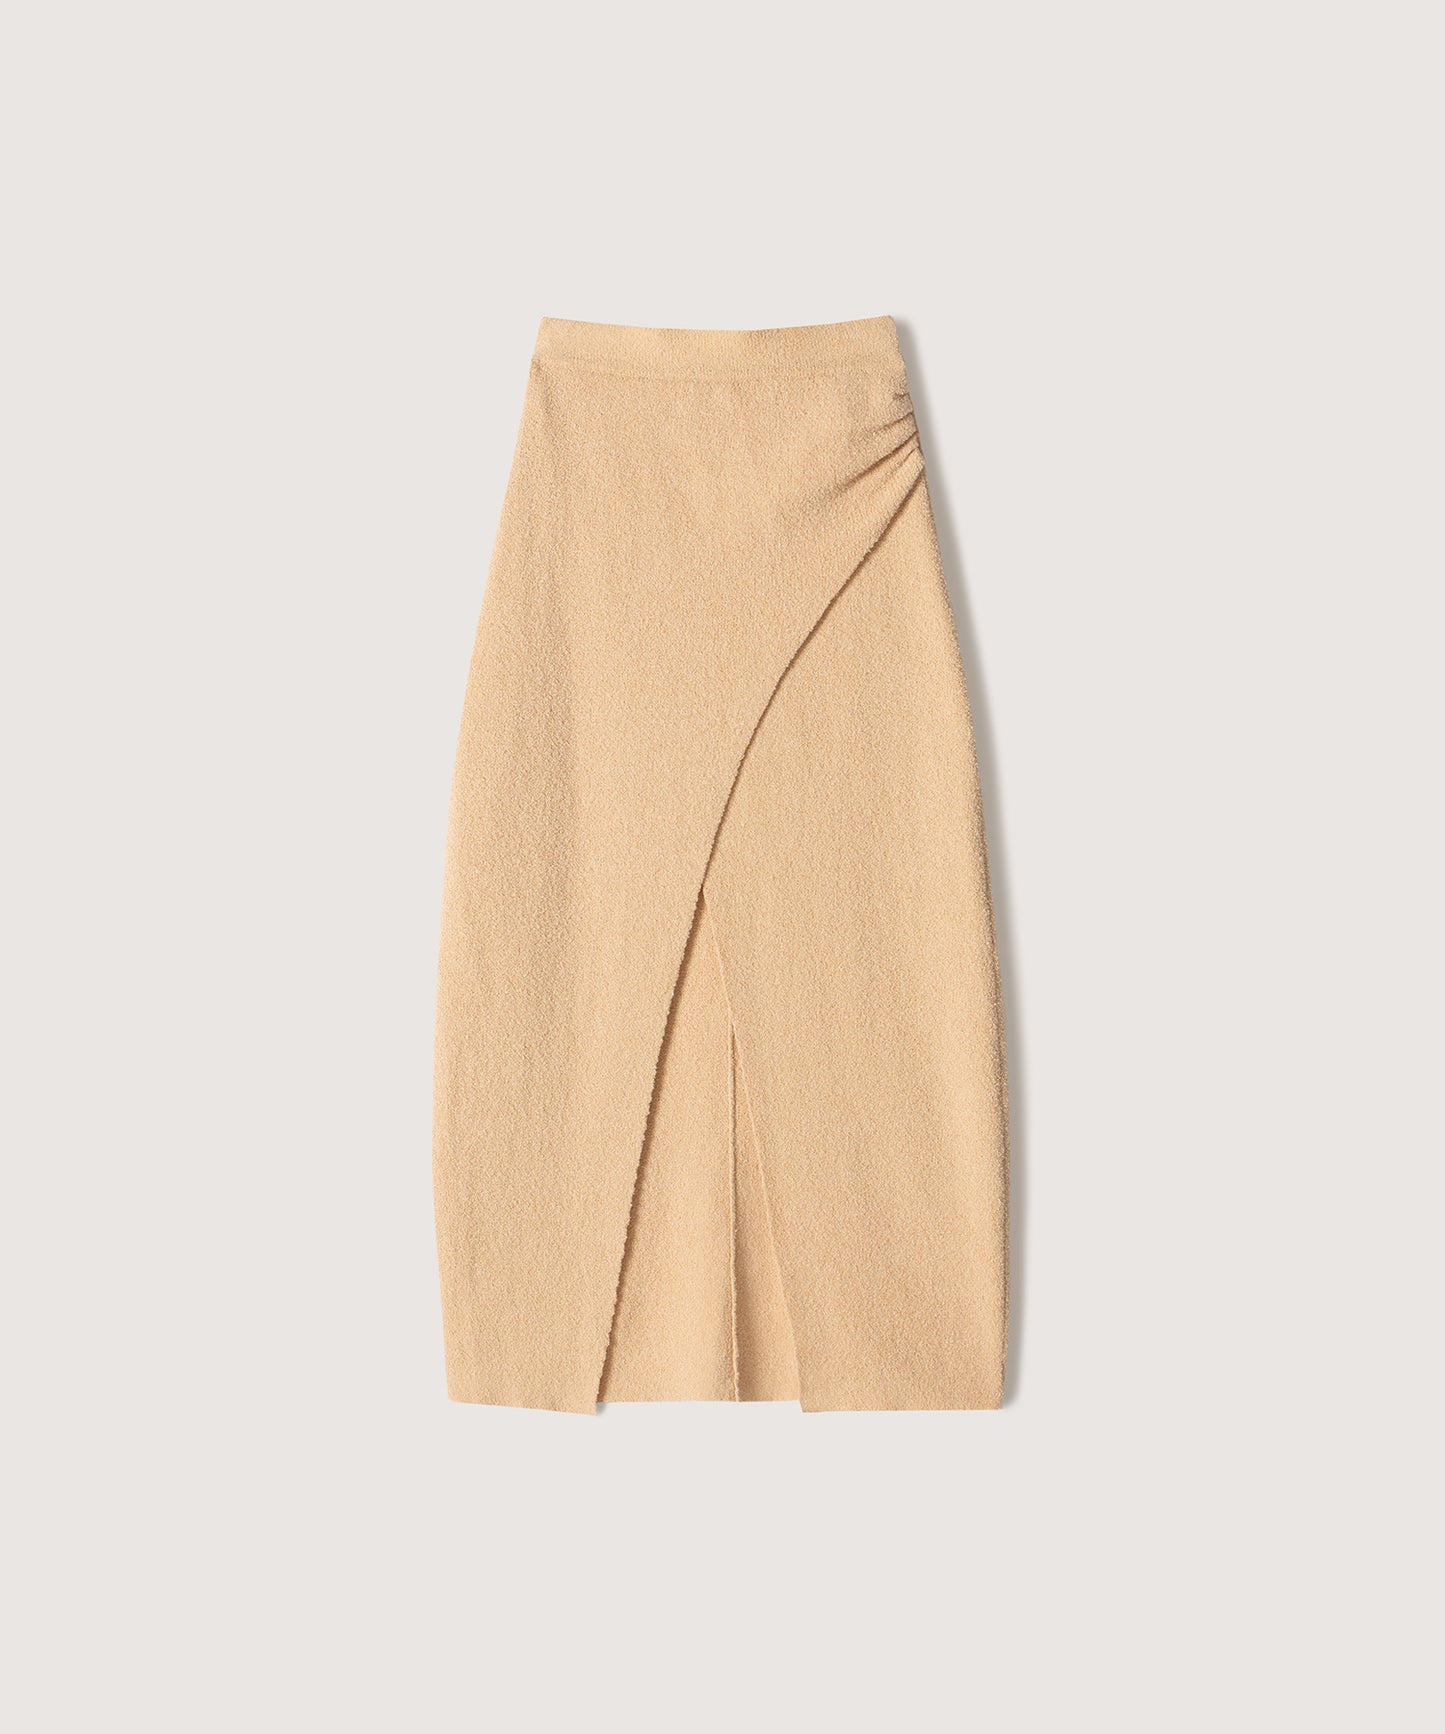 Ainsley - Terry-Knit Wrap Skirt - Apricot